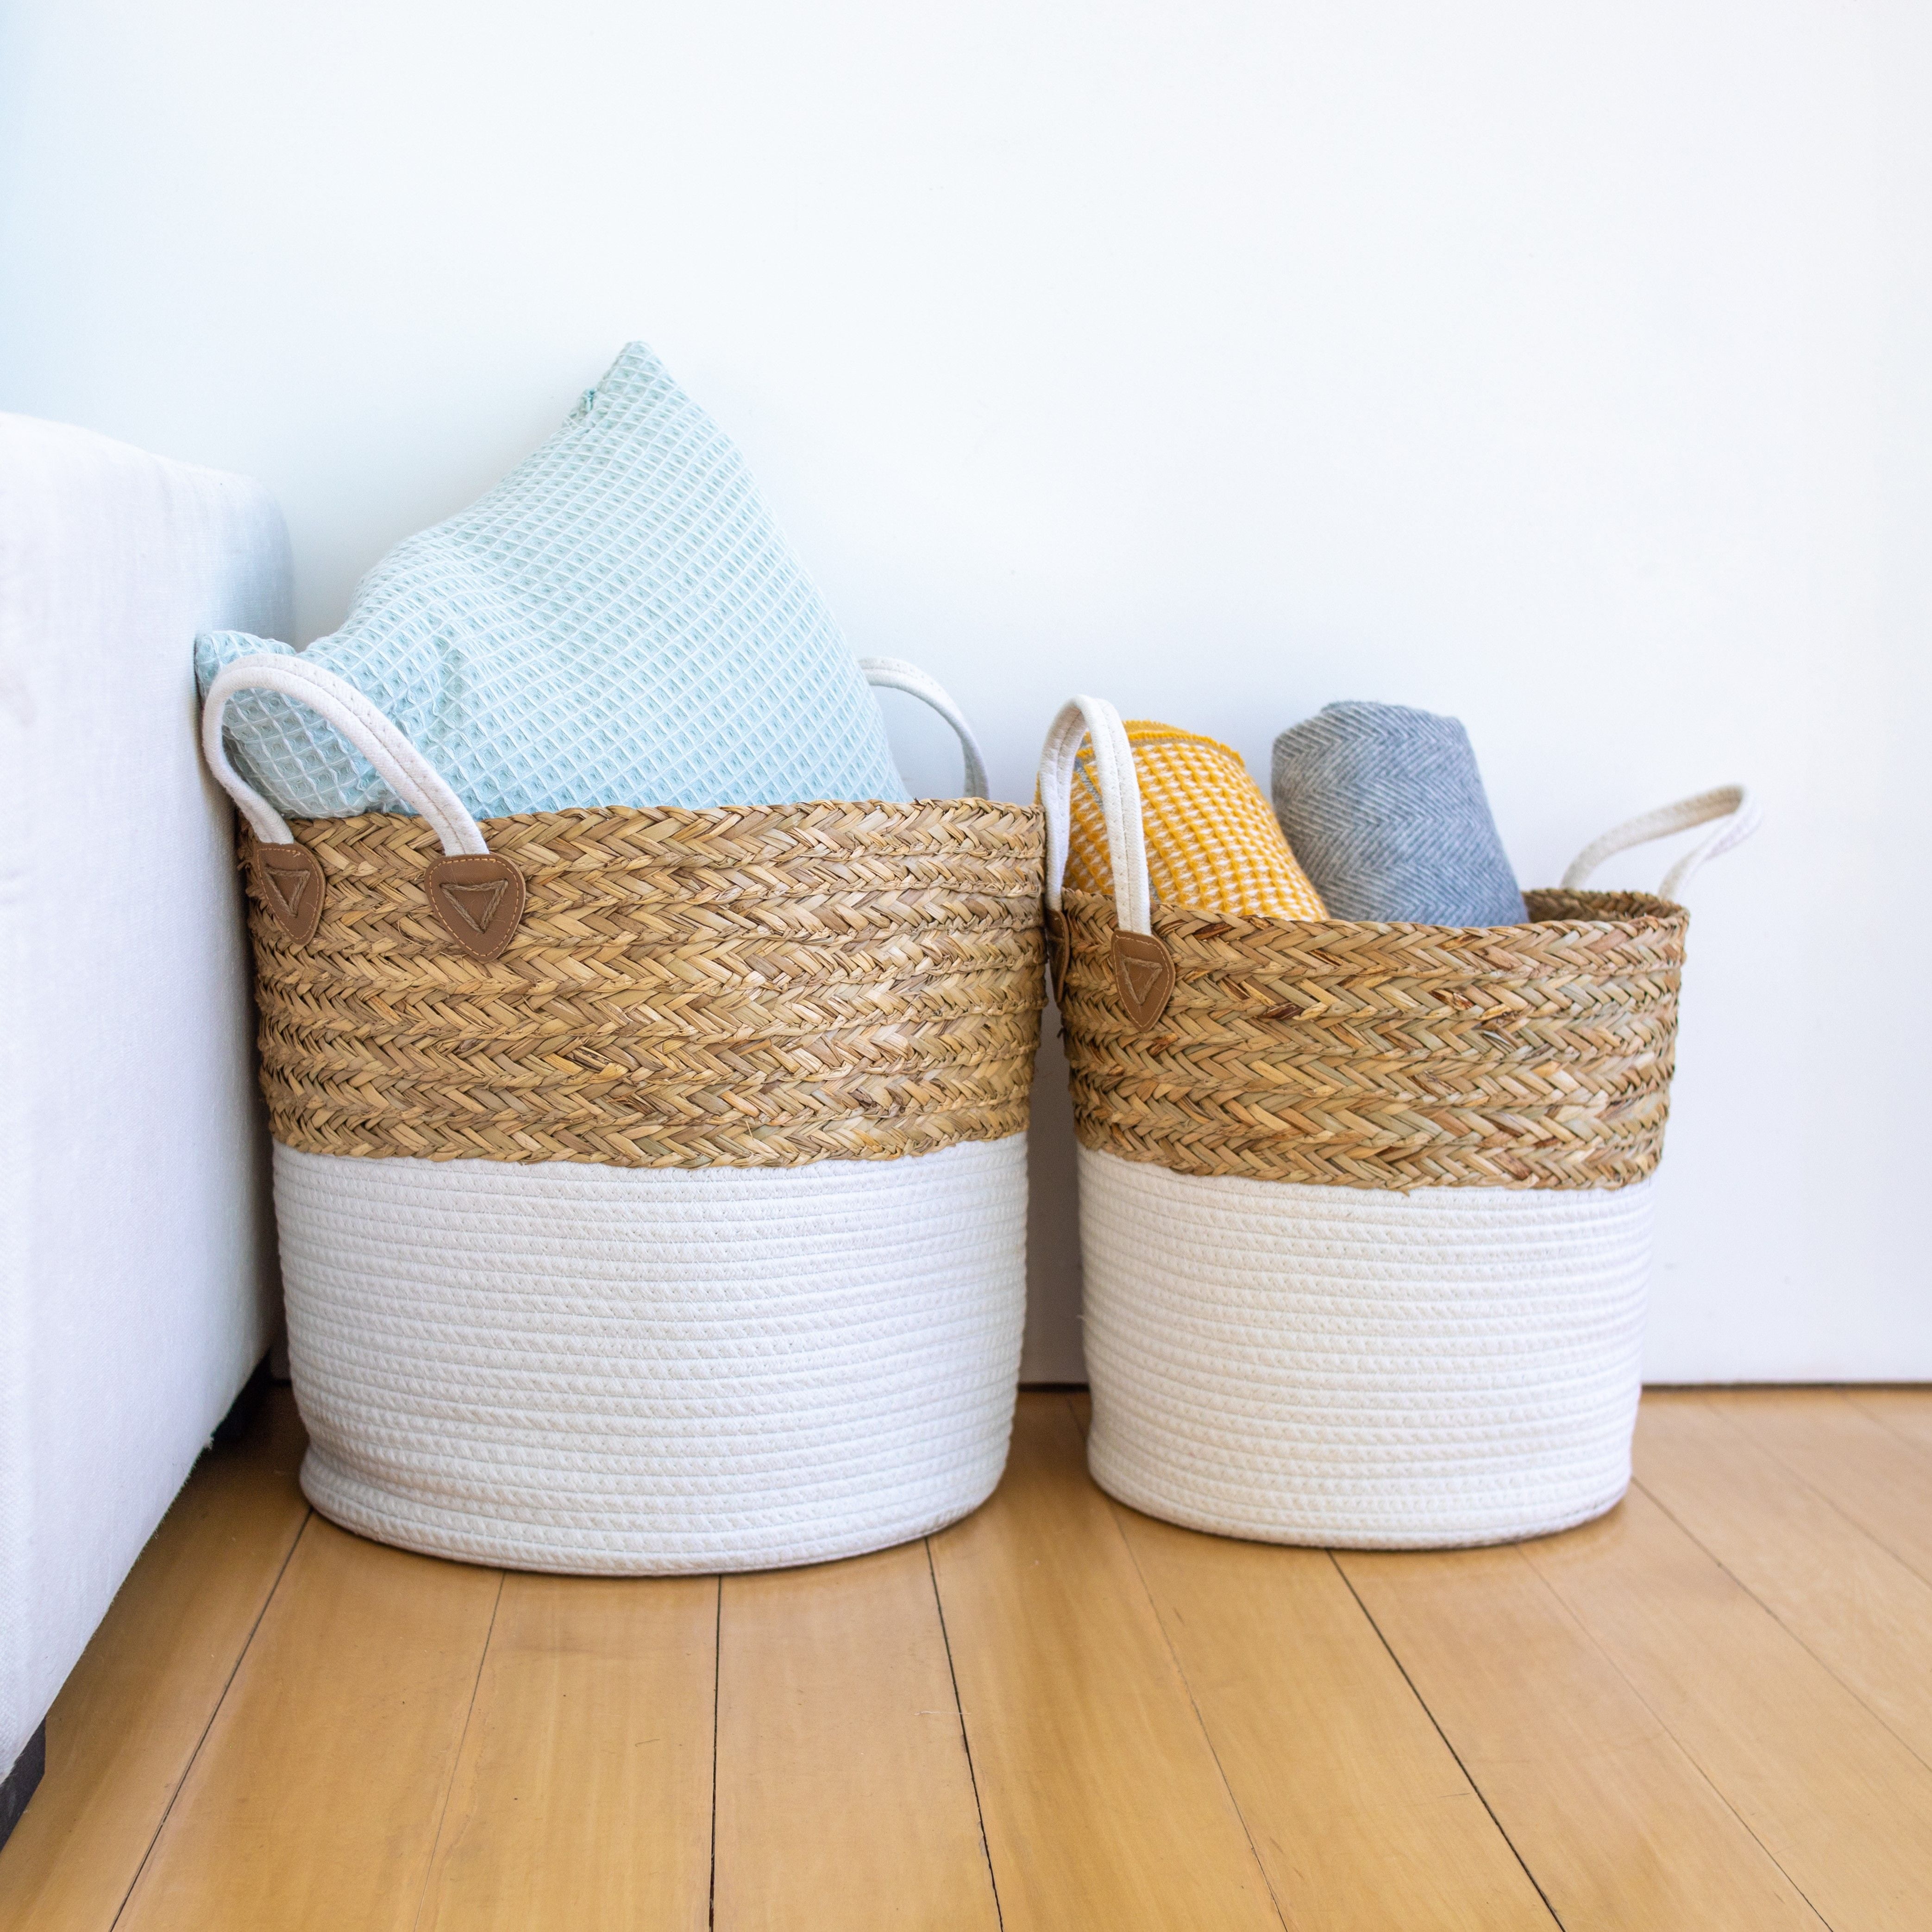 Small Seagrass Storage Basket - Beige - Home All